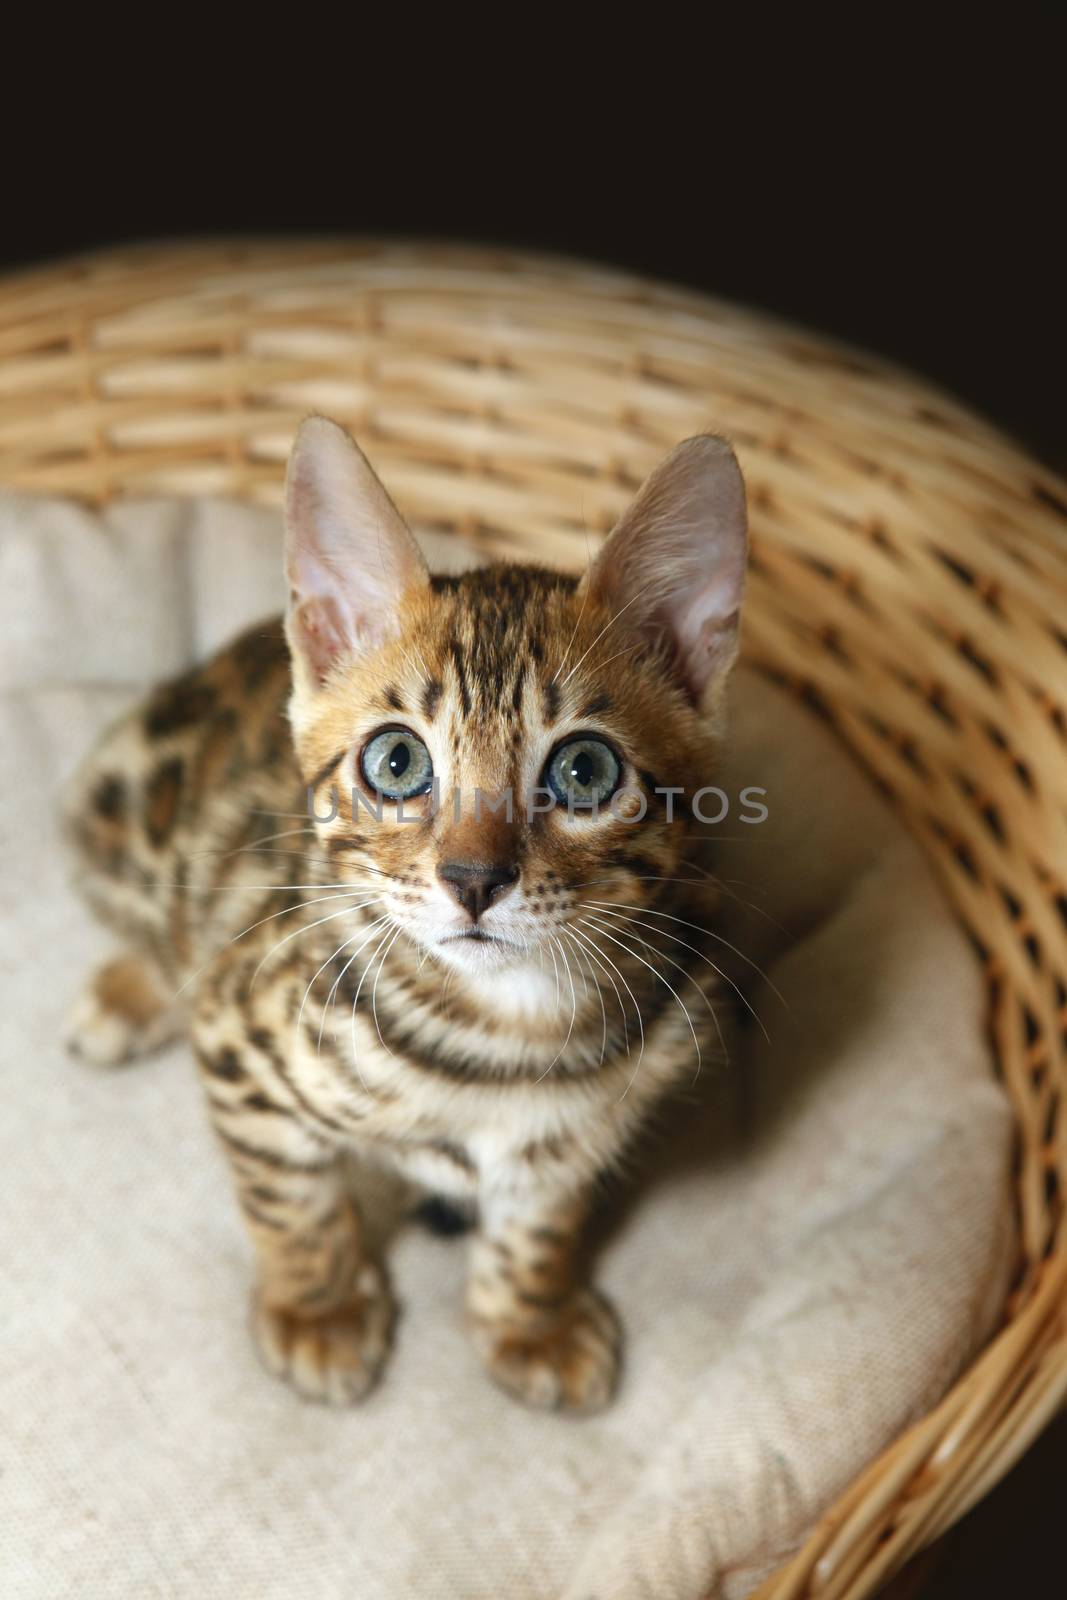 Small bengal kitten in a basket